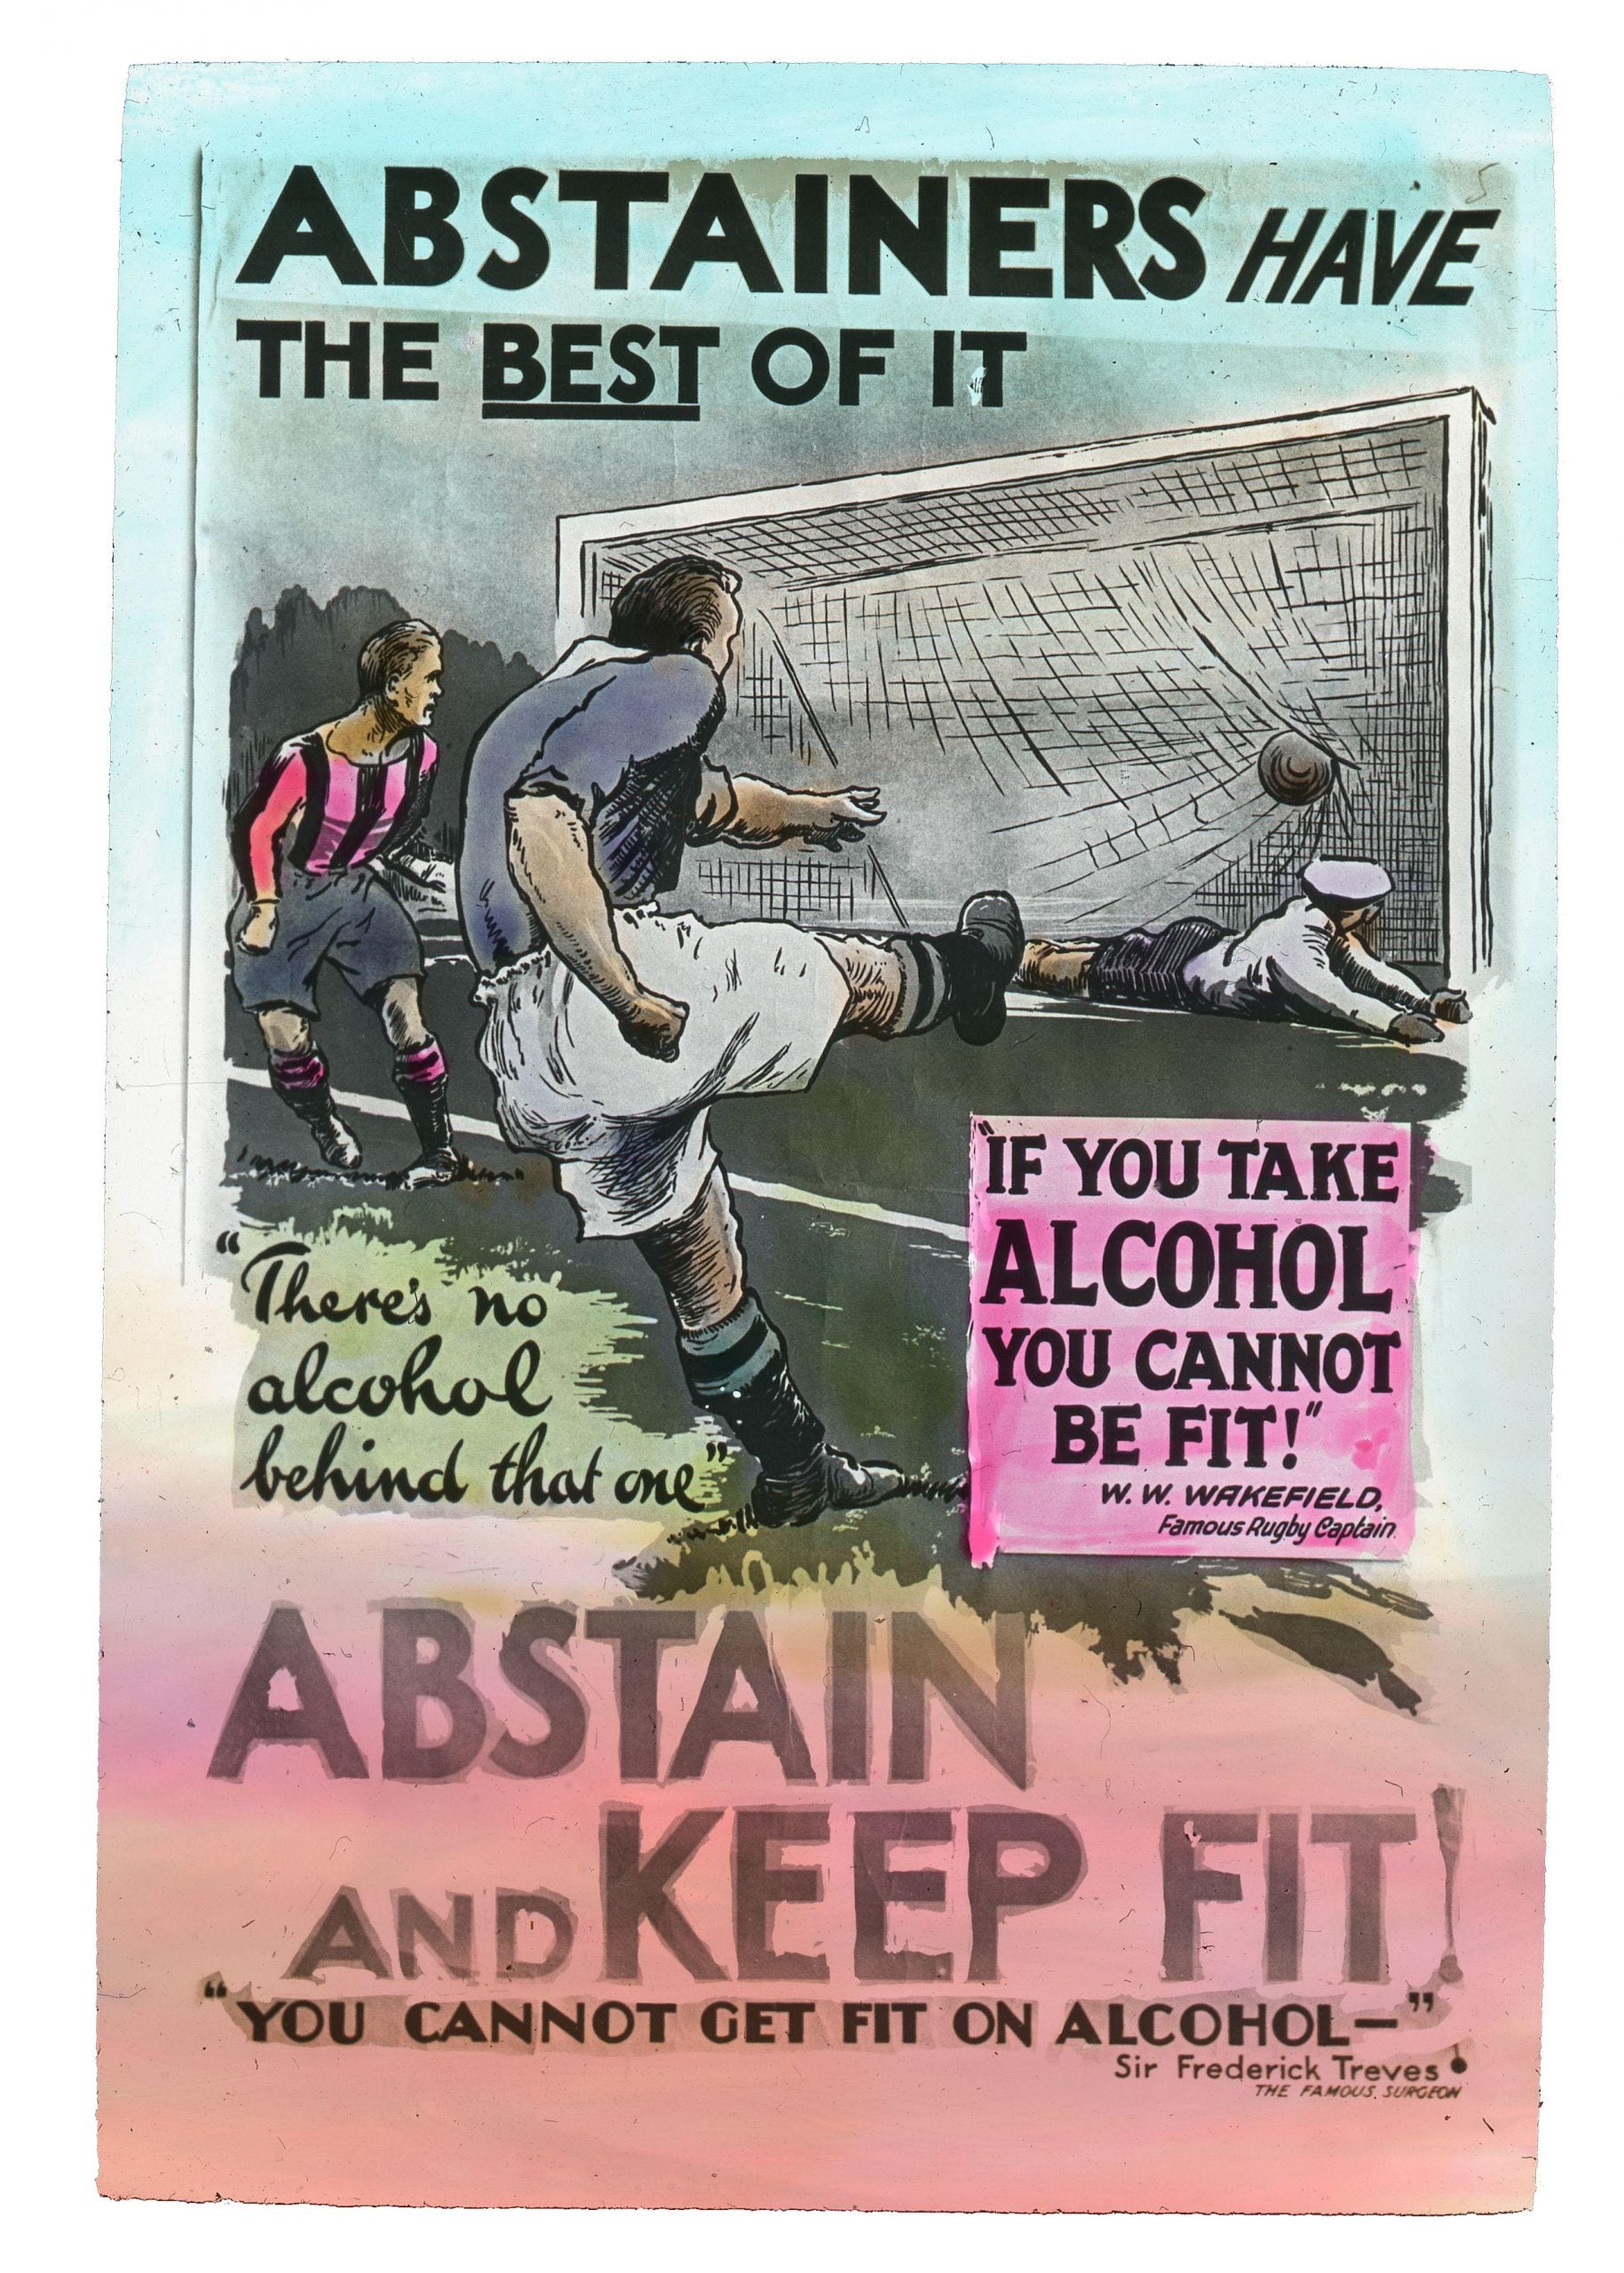 Lantern Slide: ABSTAINERS HAVE THE BEST OF IT "There's no alcohol behind that one" "IF YOU TAKE ALCOHOL YOU CANNOT BE FIT!" W.W. WAKEFIELD, Famous Rugby Captain ABSTAIN AND KEEP FIT! "YOU CANNOT GET FIT ON ALCOHOL-" Sir Frederick Treves THE FAMOUS SURGEON